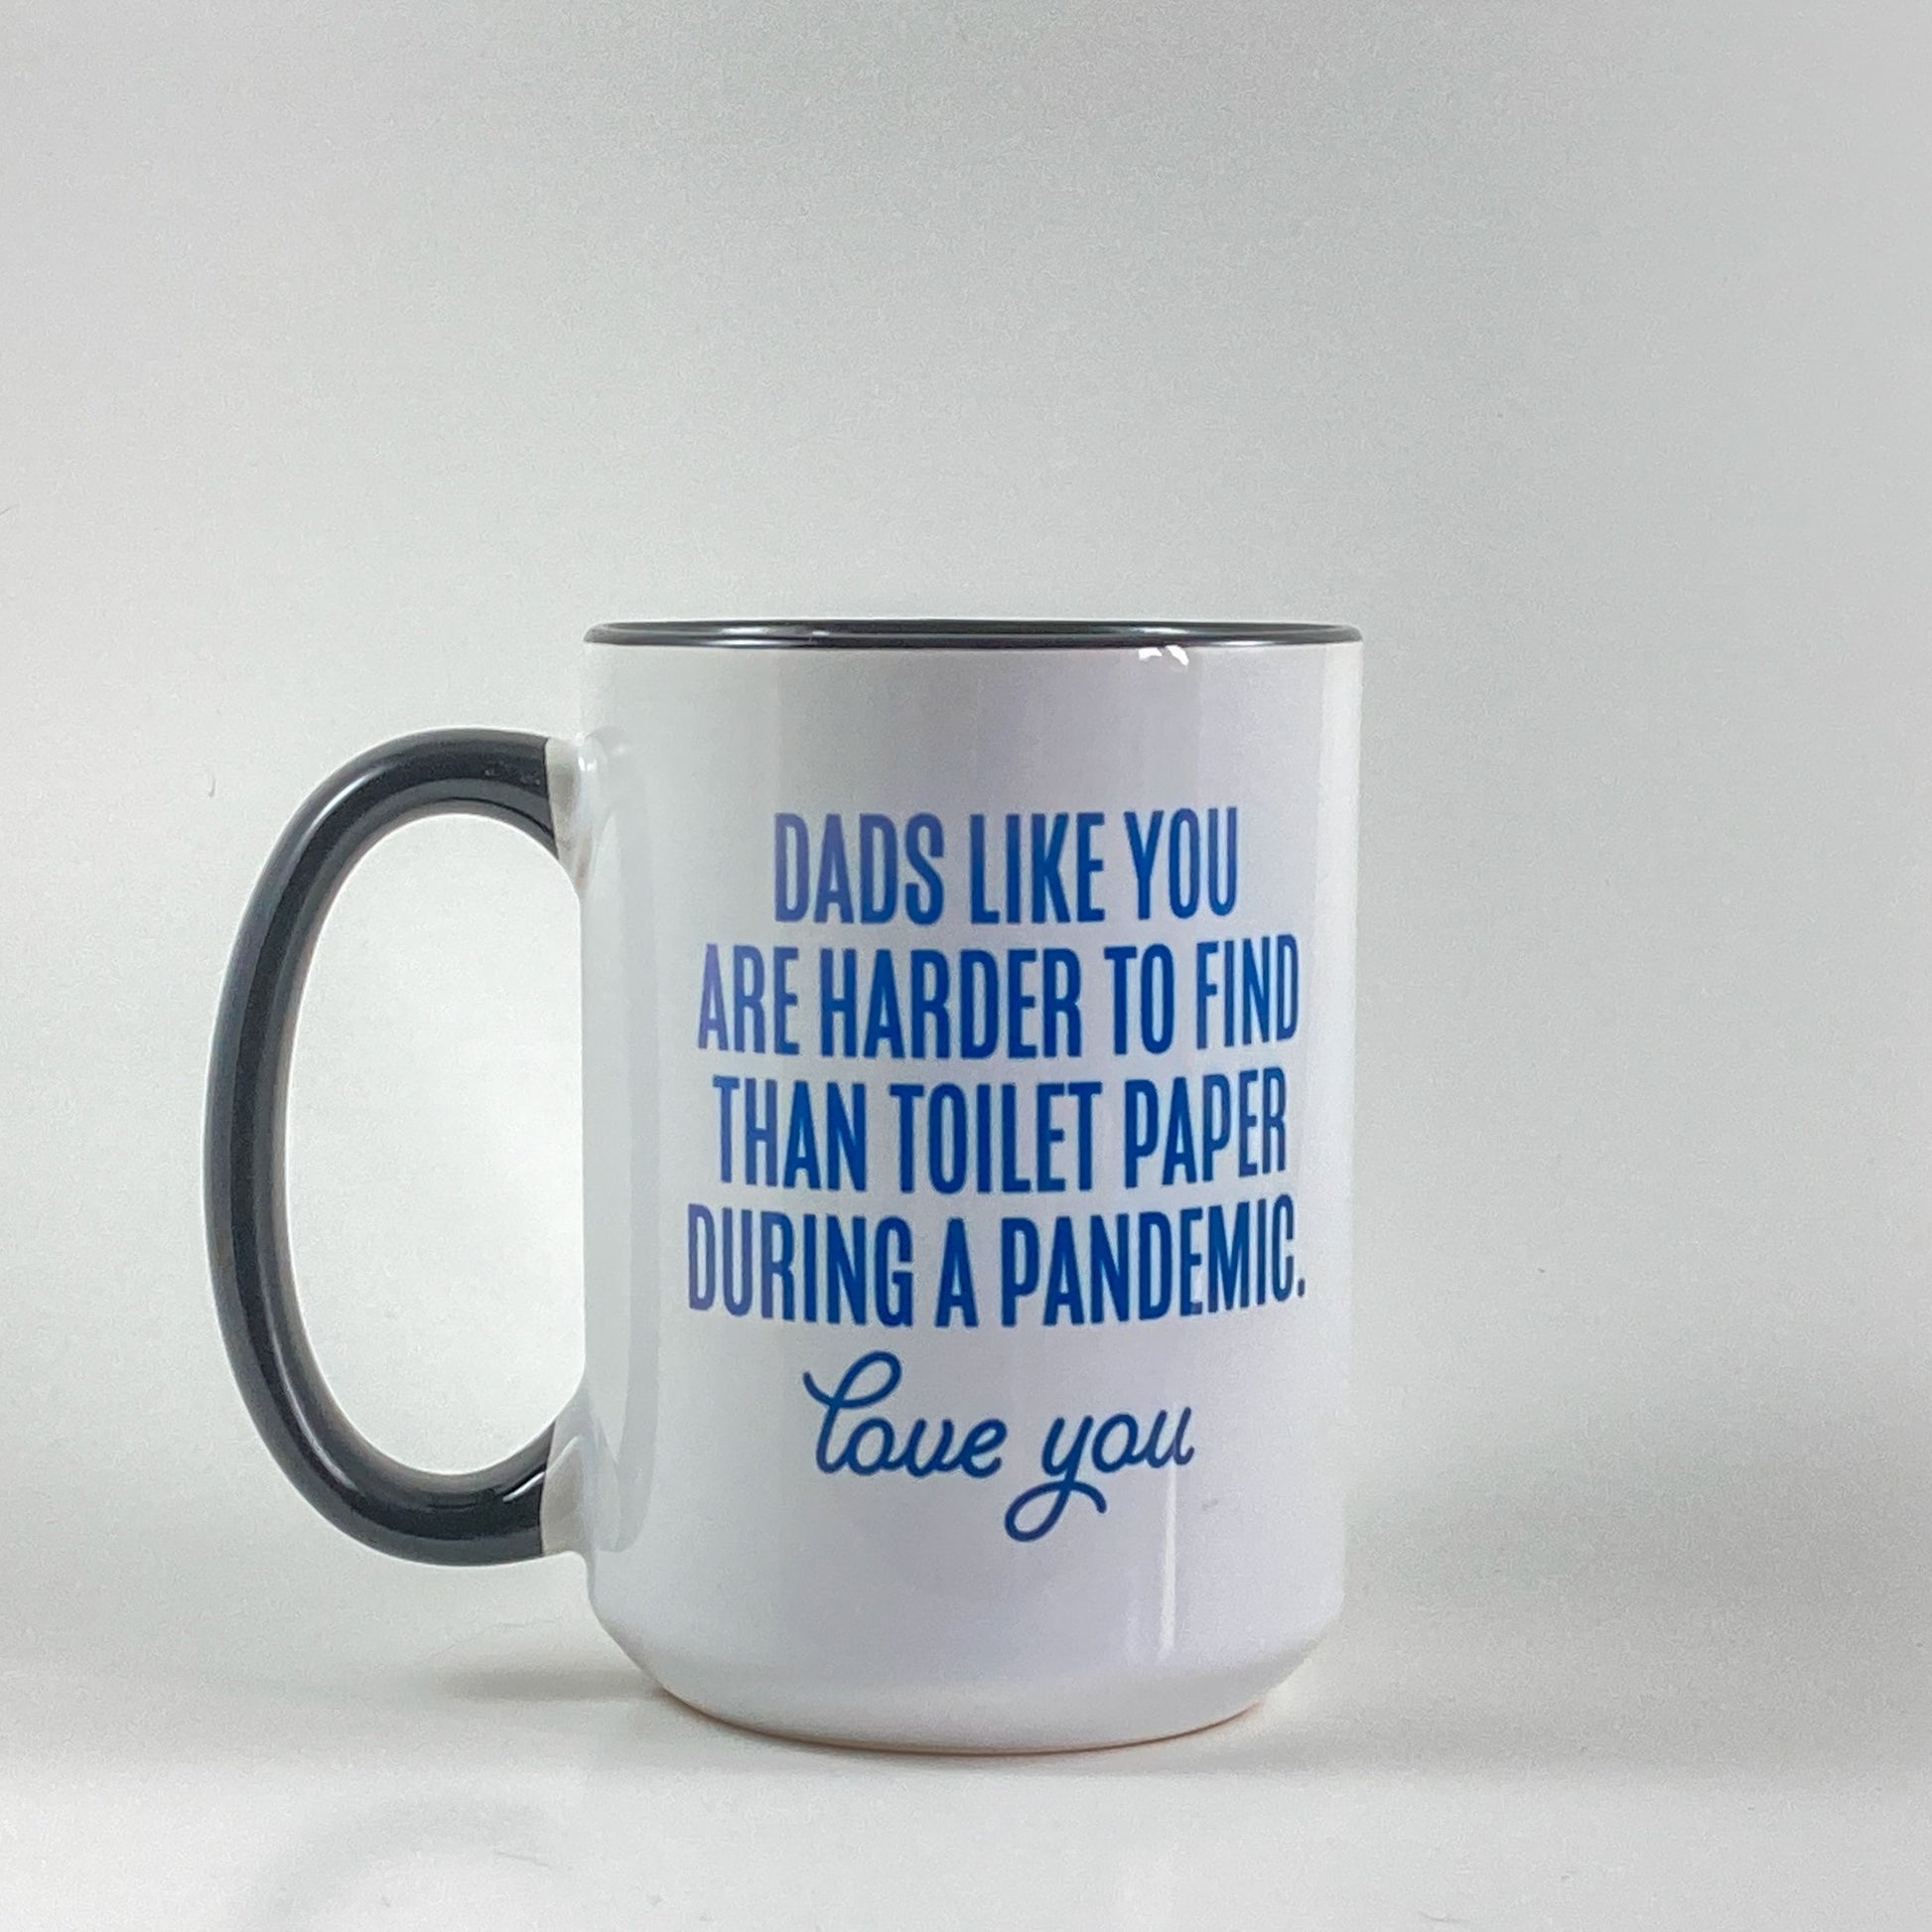 Dads like You are Harder to Find than Toilet Paper in a Pandemic. Coffe Mug